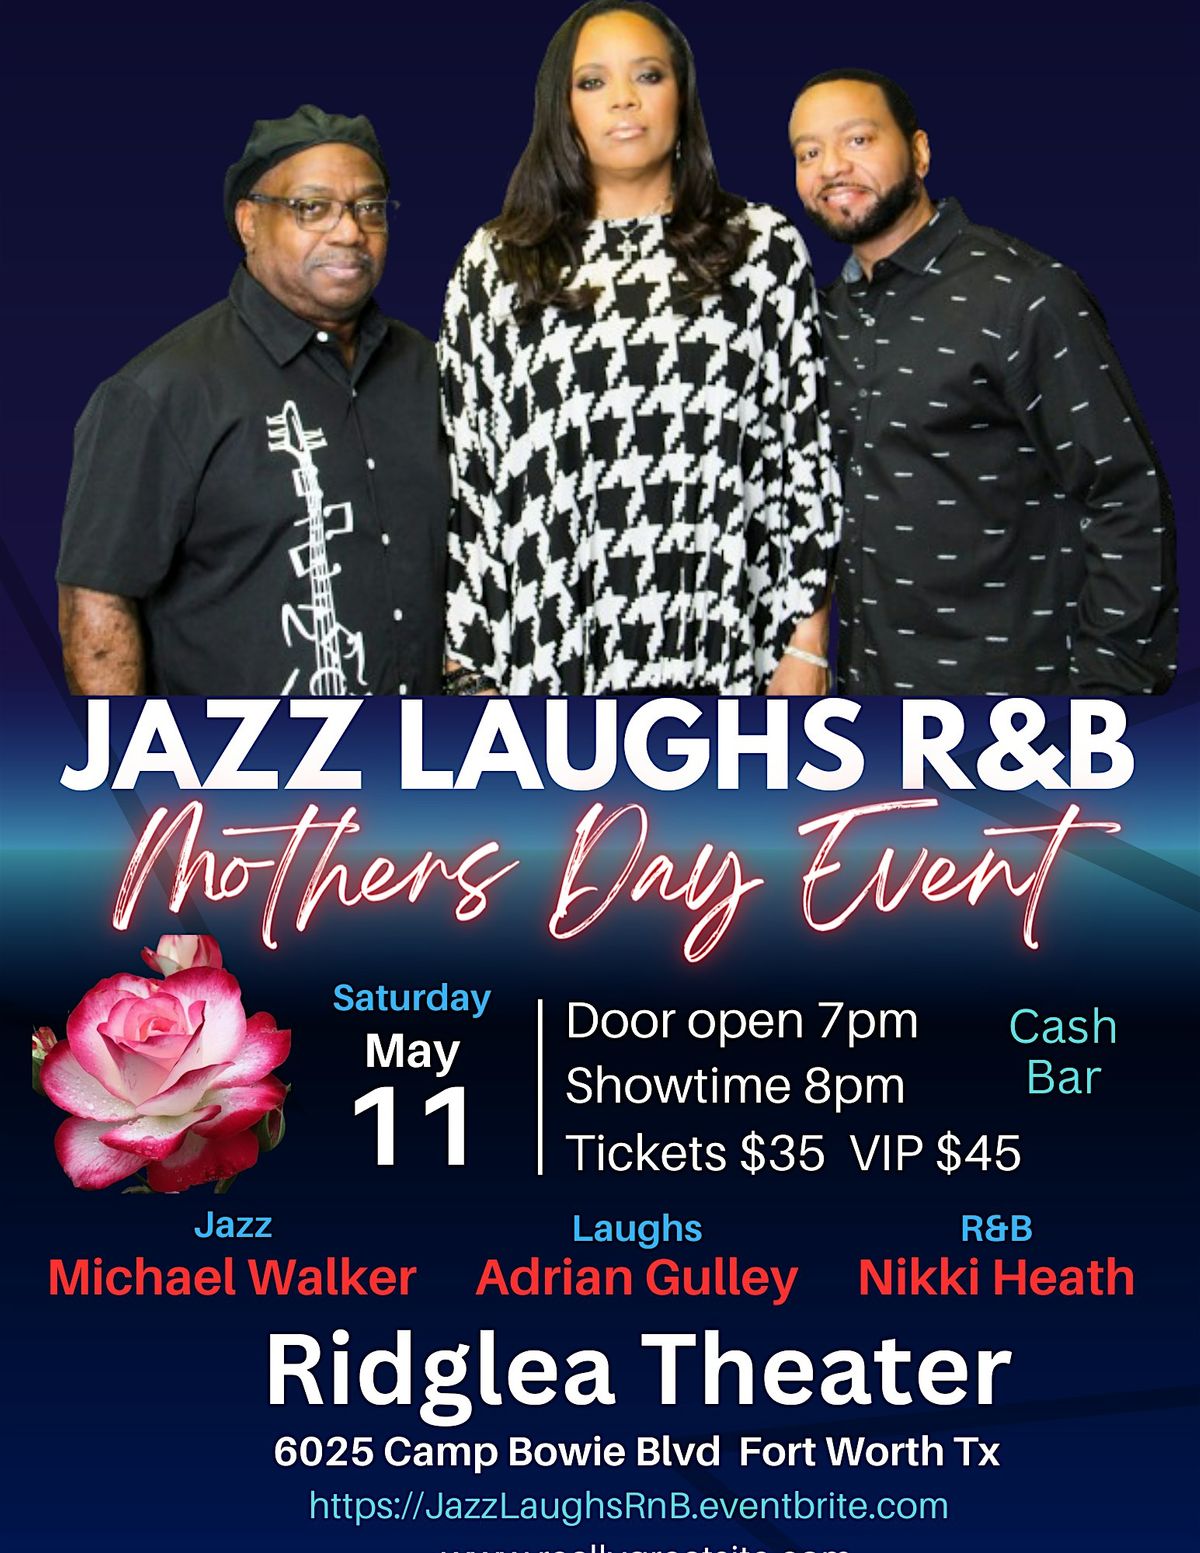 A Mother's Day Event: Jazz, Laughs and RnB